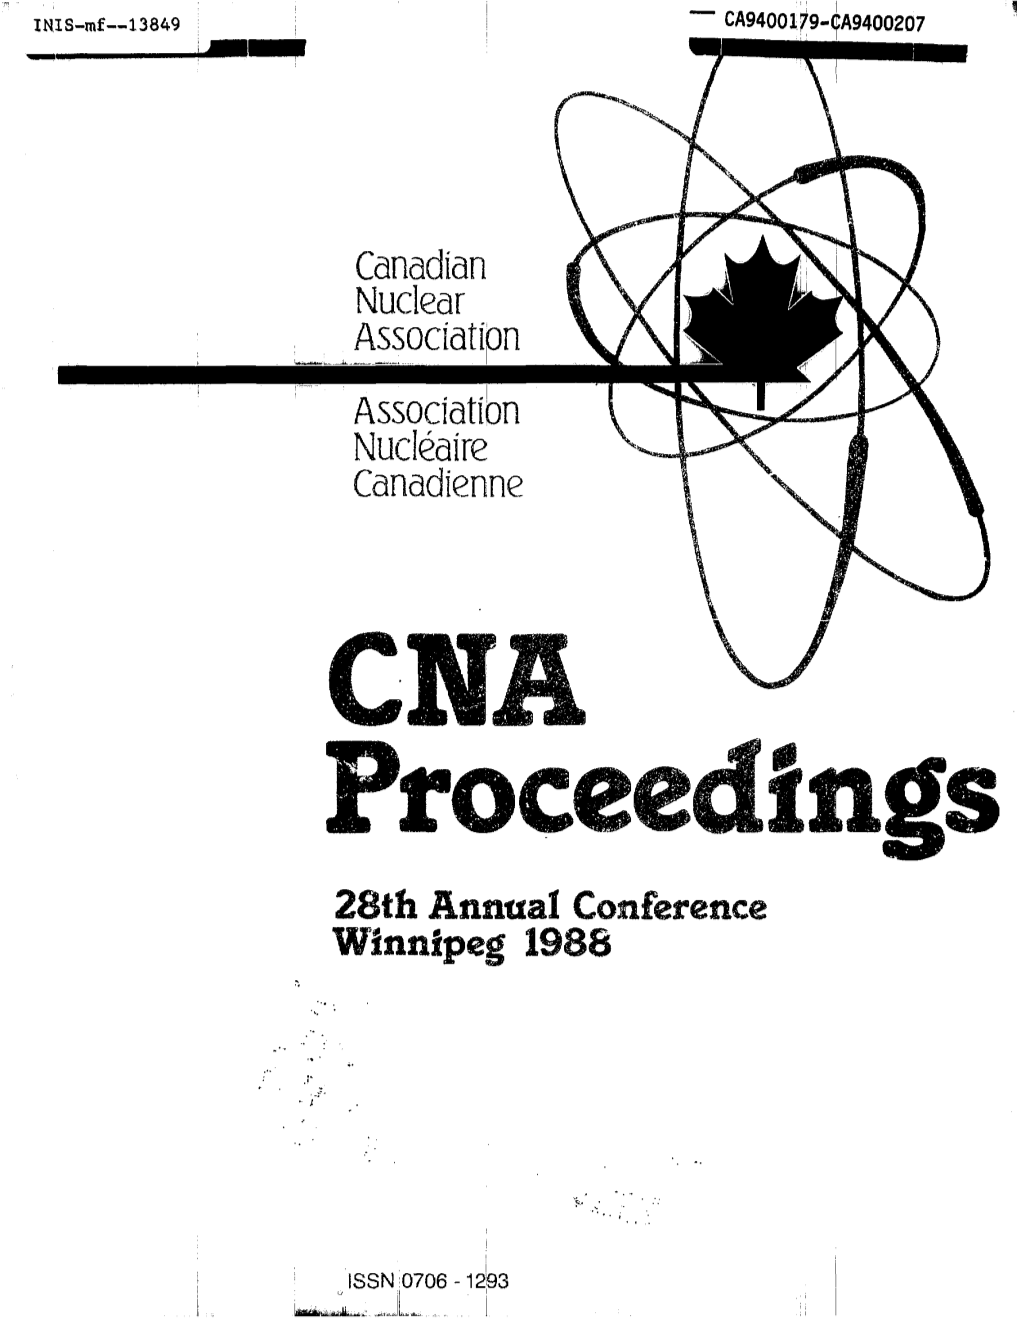 Canadian Nuclear Association Association Nucleaire Canadienne